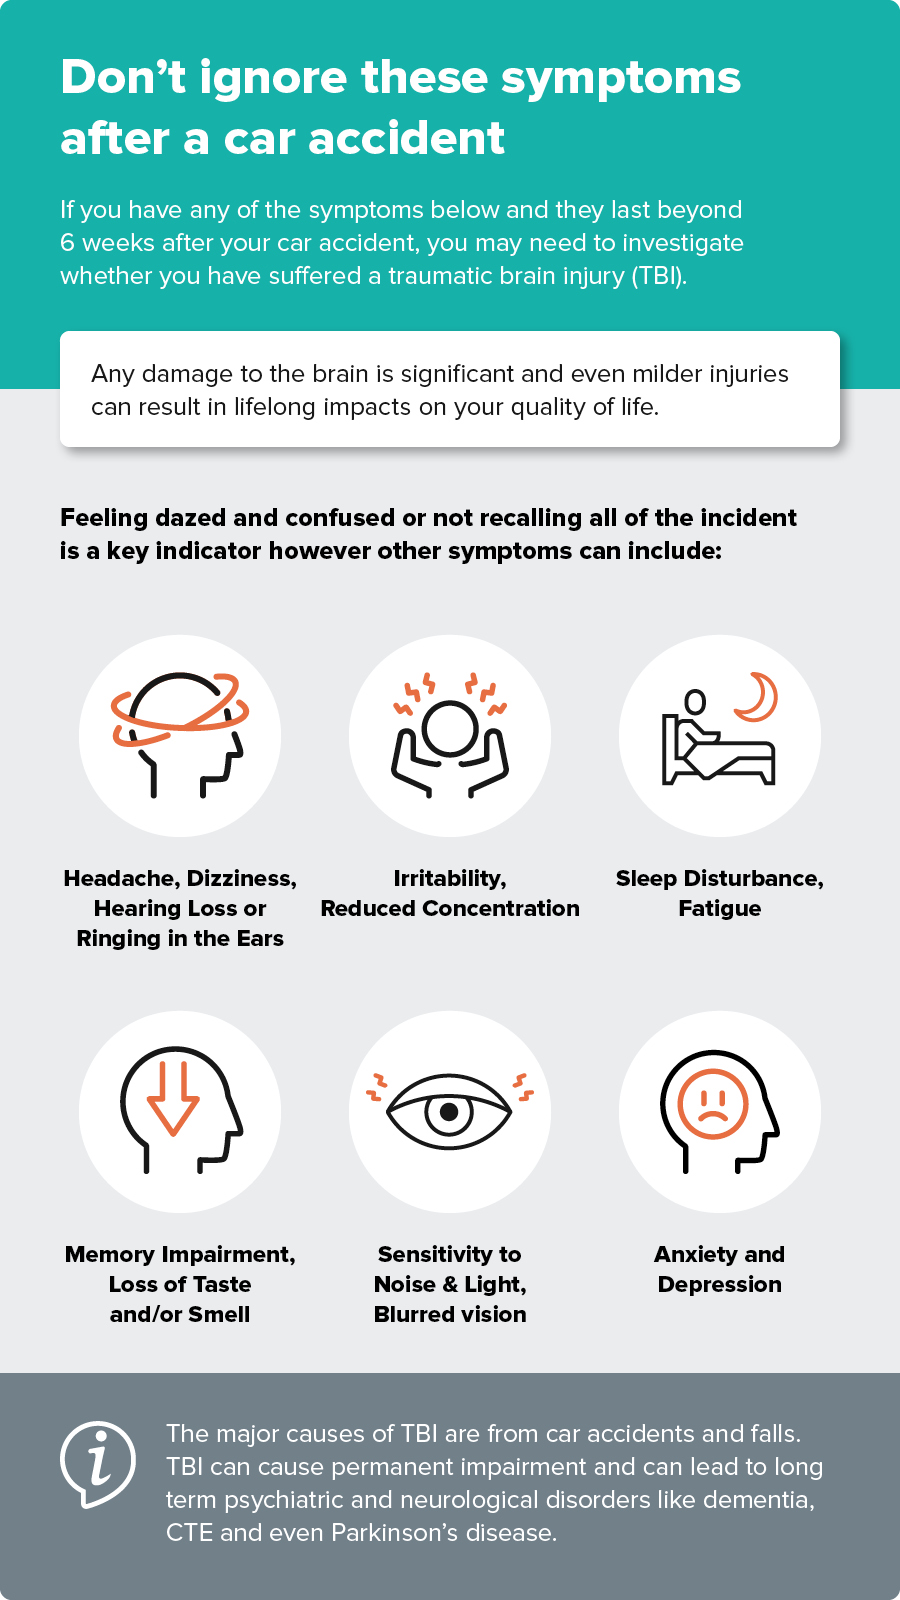 Don't ignore these brain injury symptoms after a car accident | Shine Lawyers